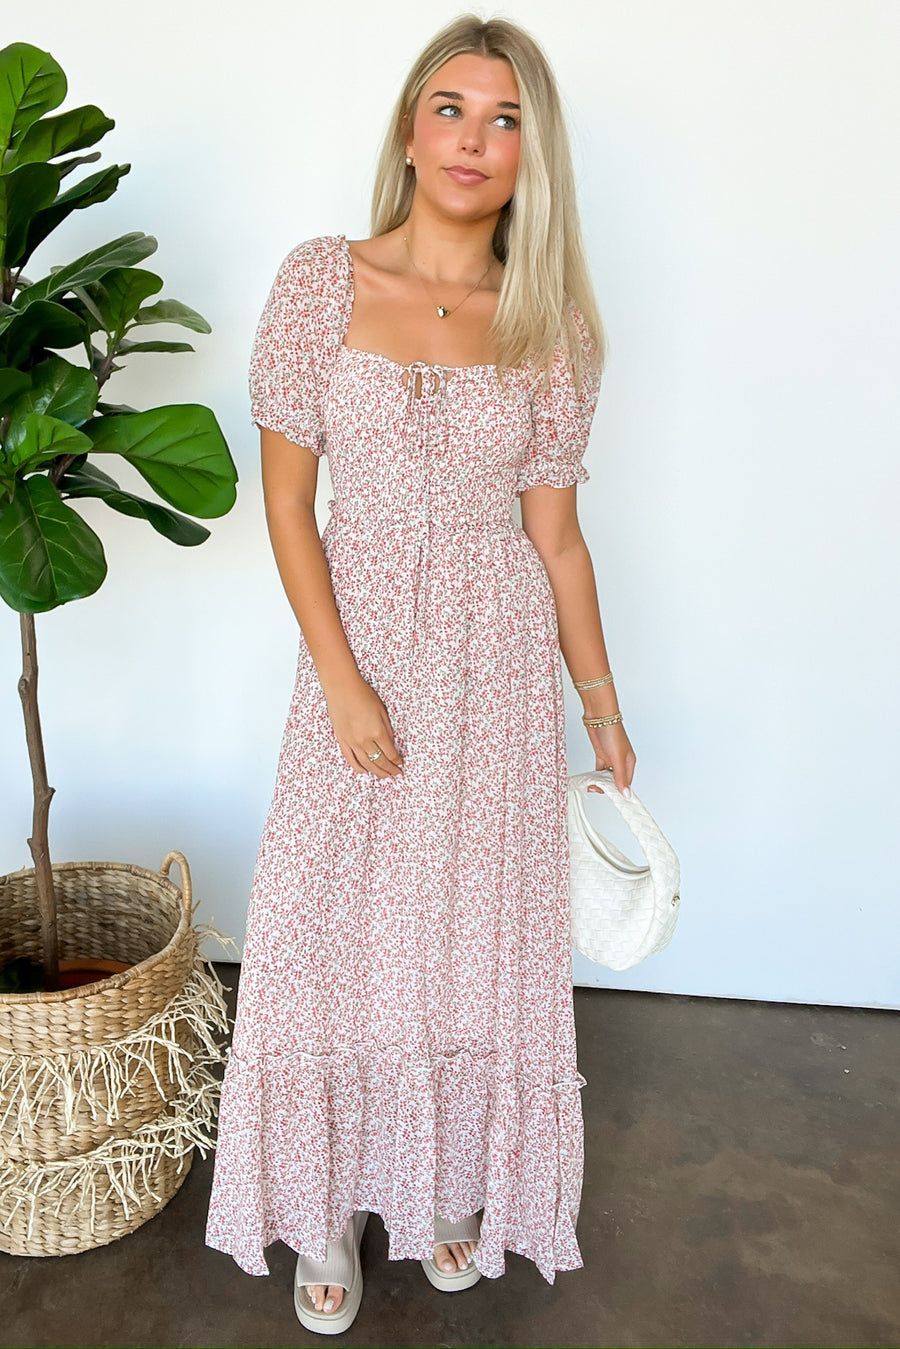  Beautifully Decadent Smocked Floral Maxi Dress - Madison and Mallory